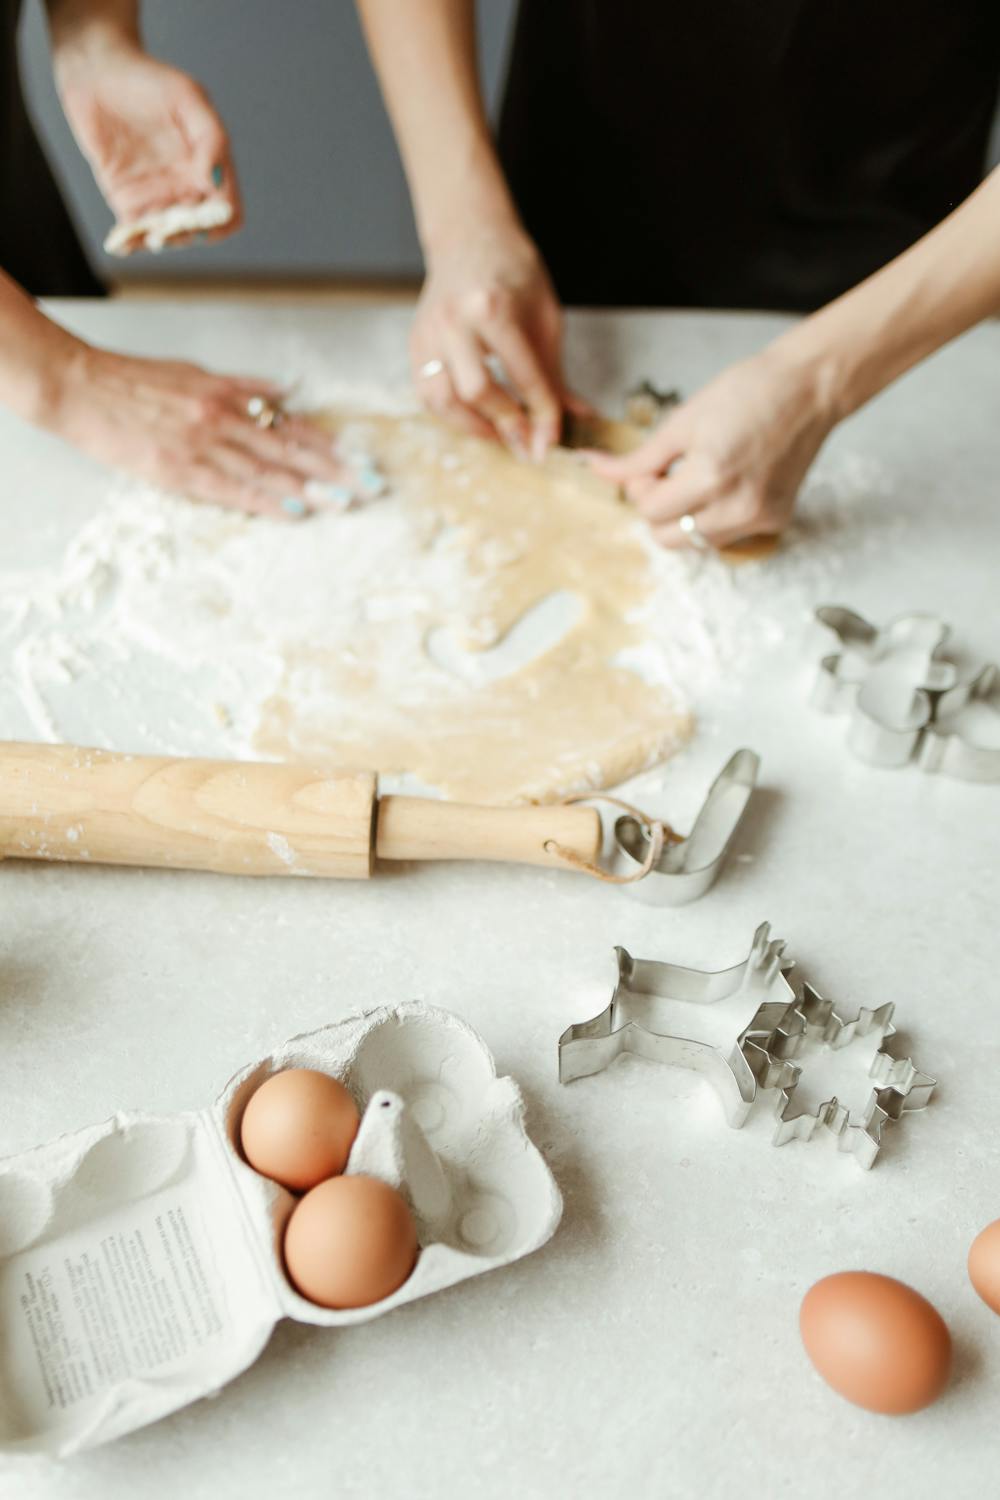 Woman Using A Cookie Cutter · Free Stock Photo